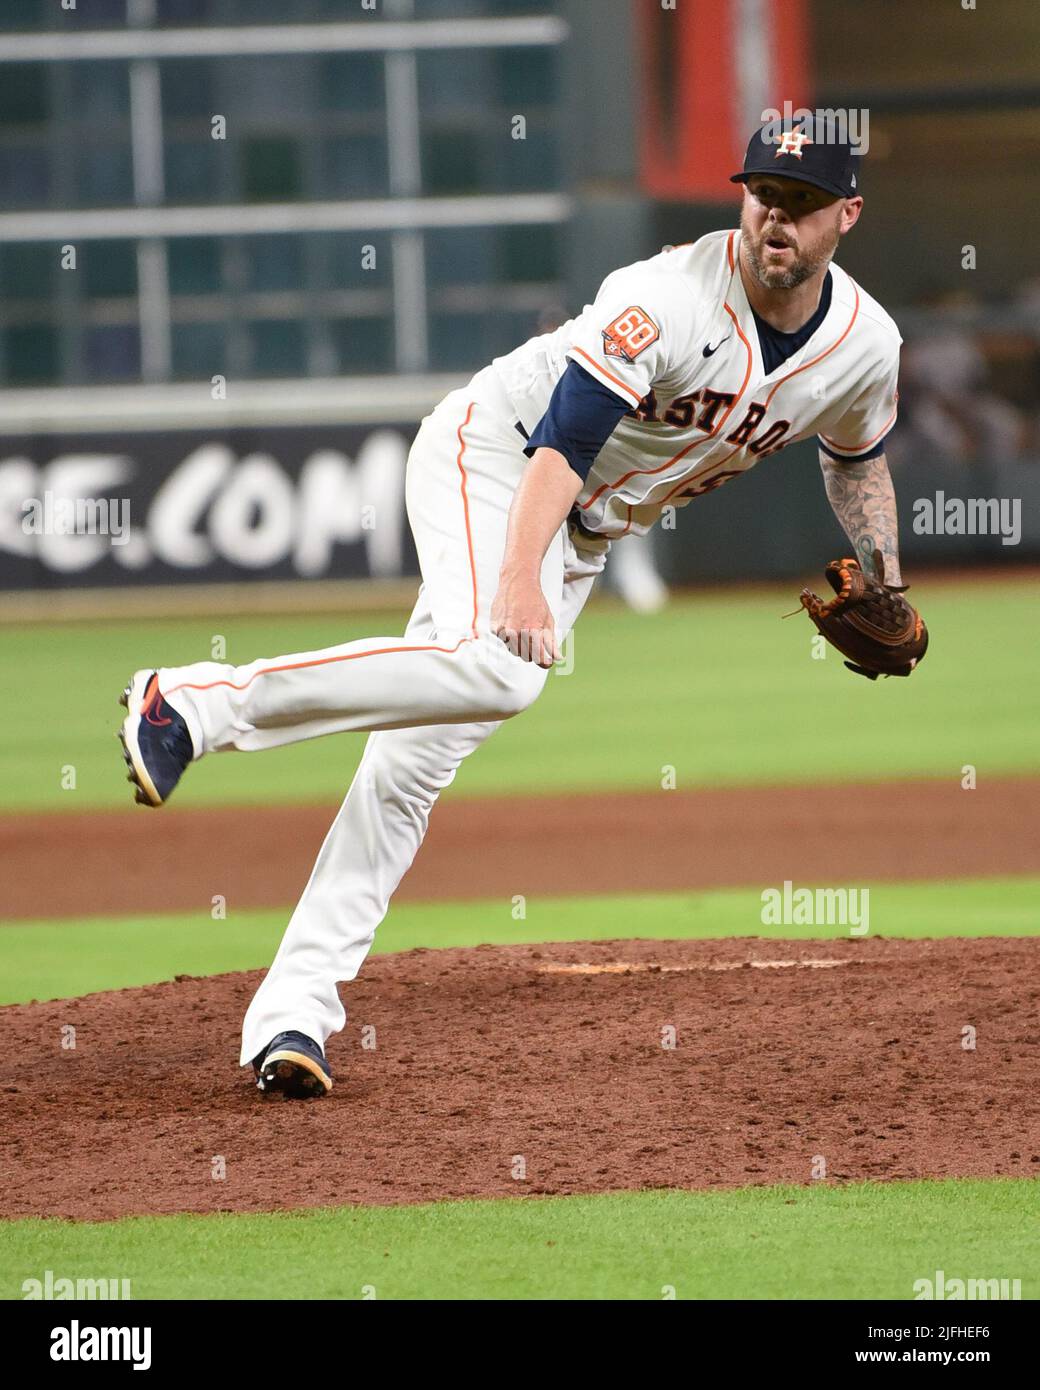 Ryan Pressly Tosses Scoreless Inning as Space Cowboys Open Homestand